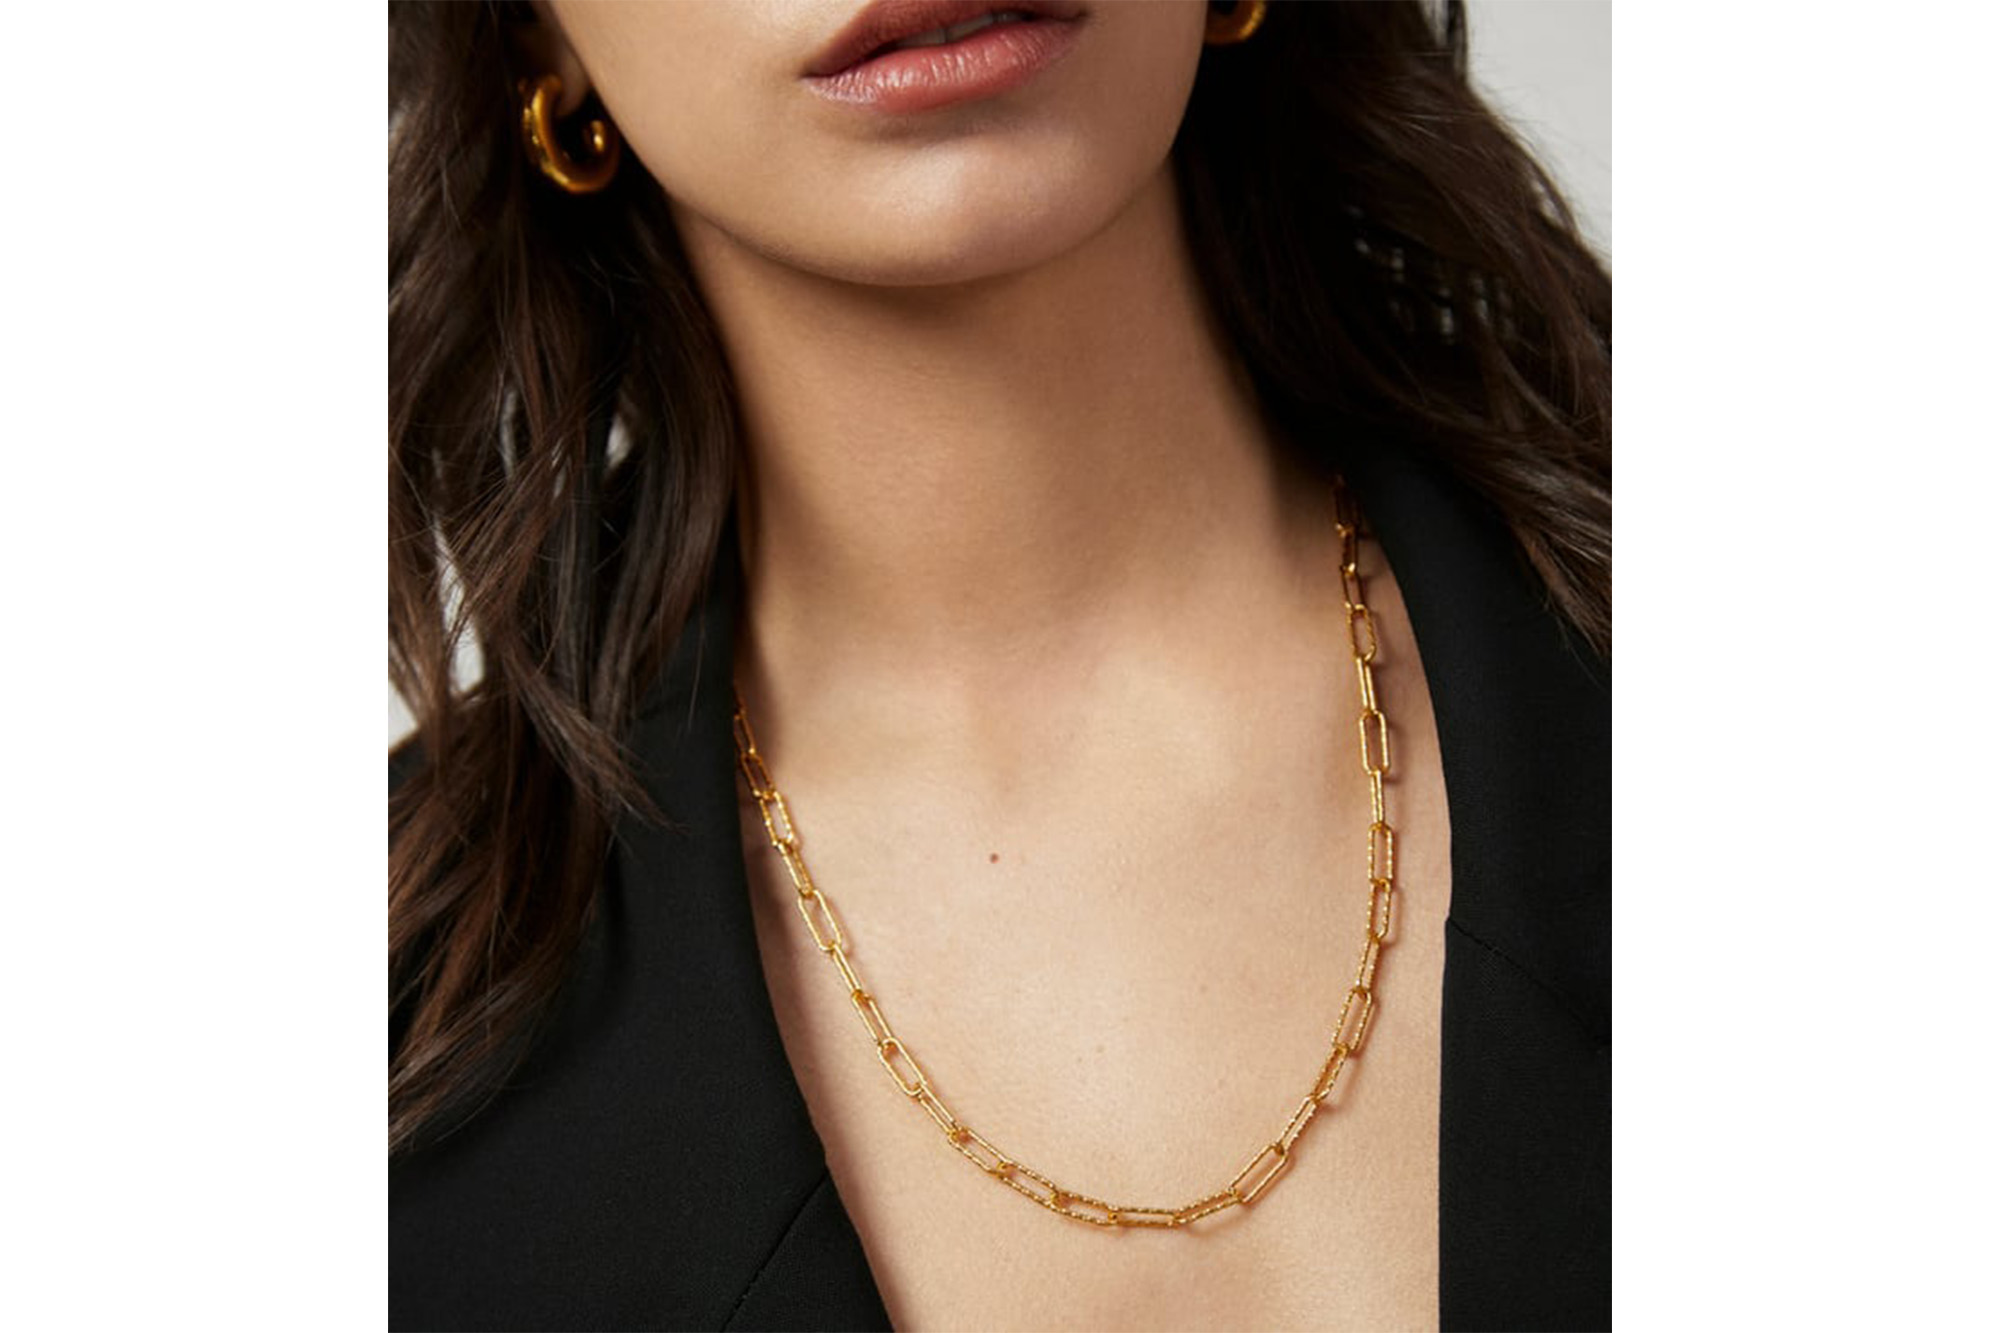 A model on a chain necklace